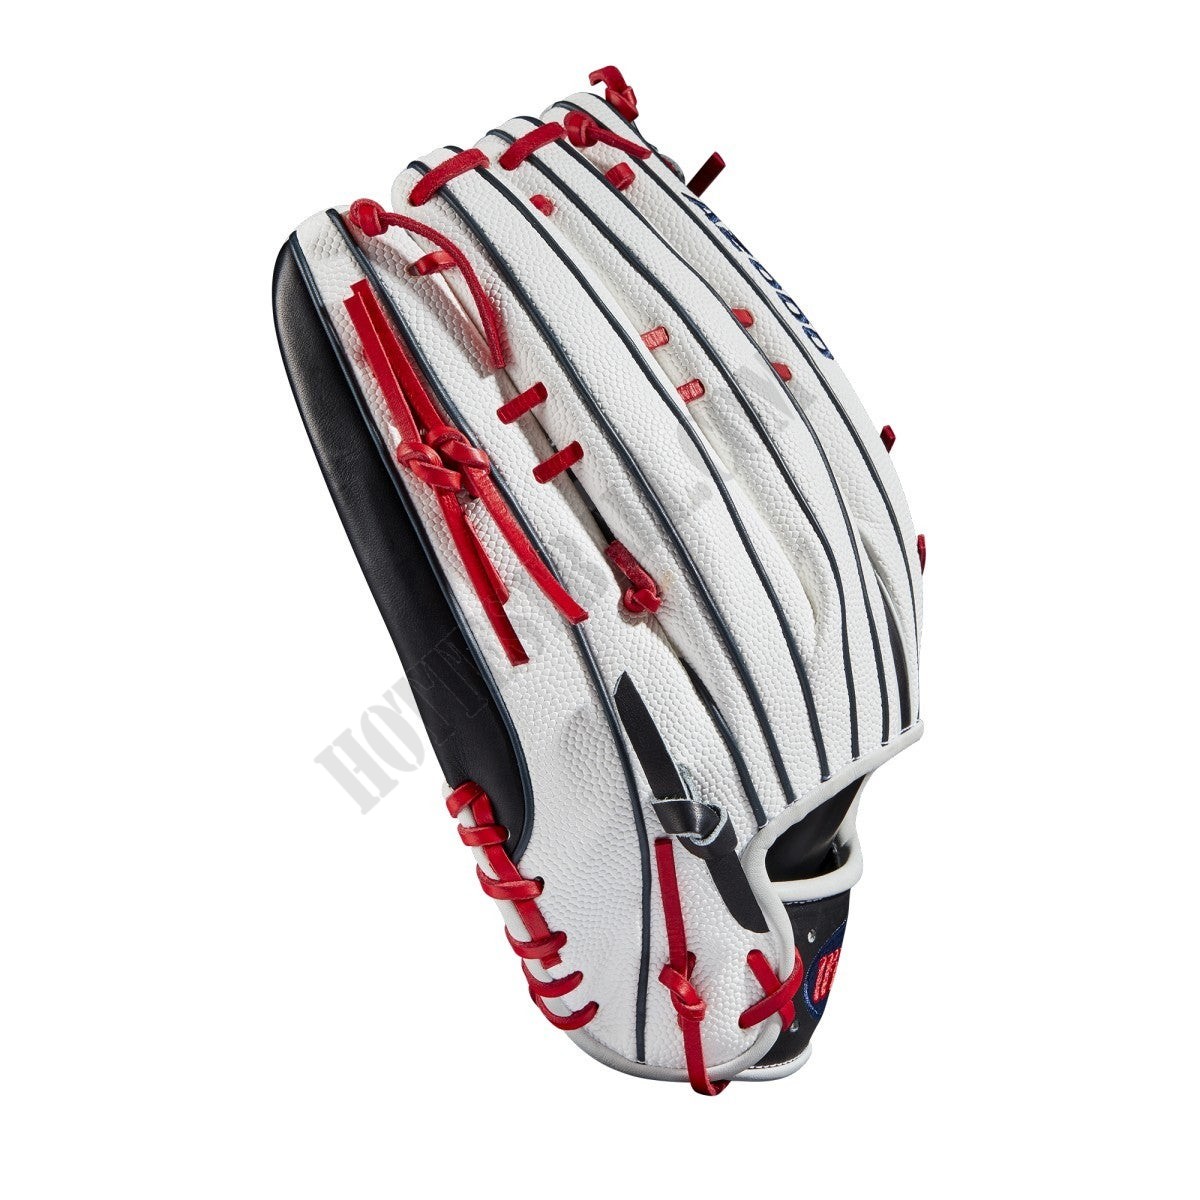 2020 A2000 SP135 13.5" Slowpitch Softball Glove ● Wilson Promotions - -4